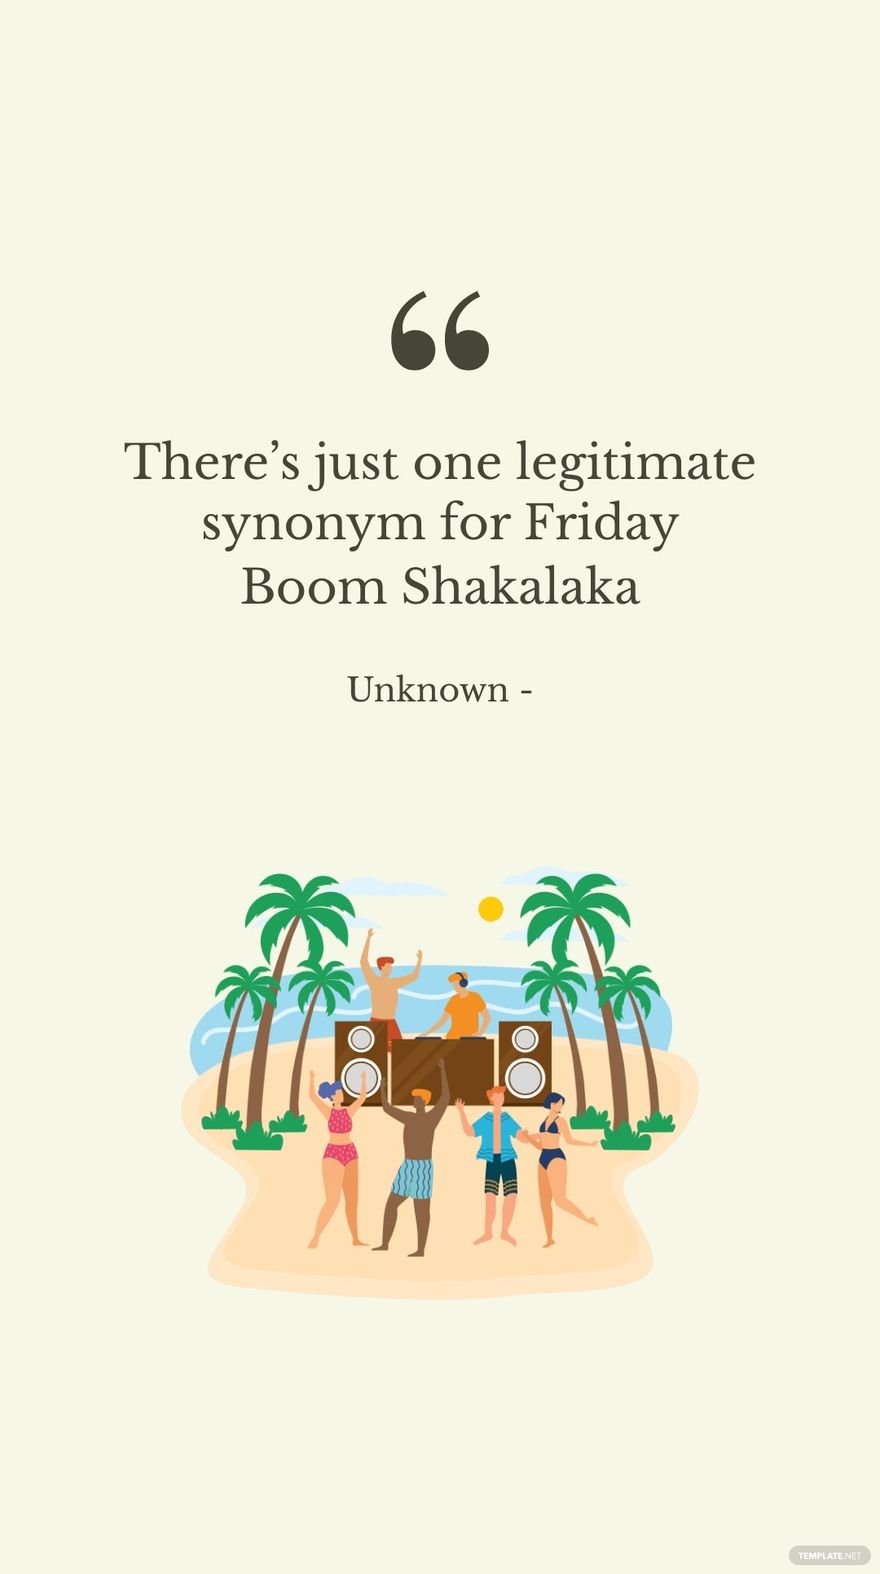 Free Unknown - There’s just one legitimate synonym for Friday Boom Shakalaka 